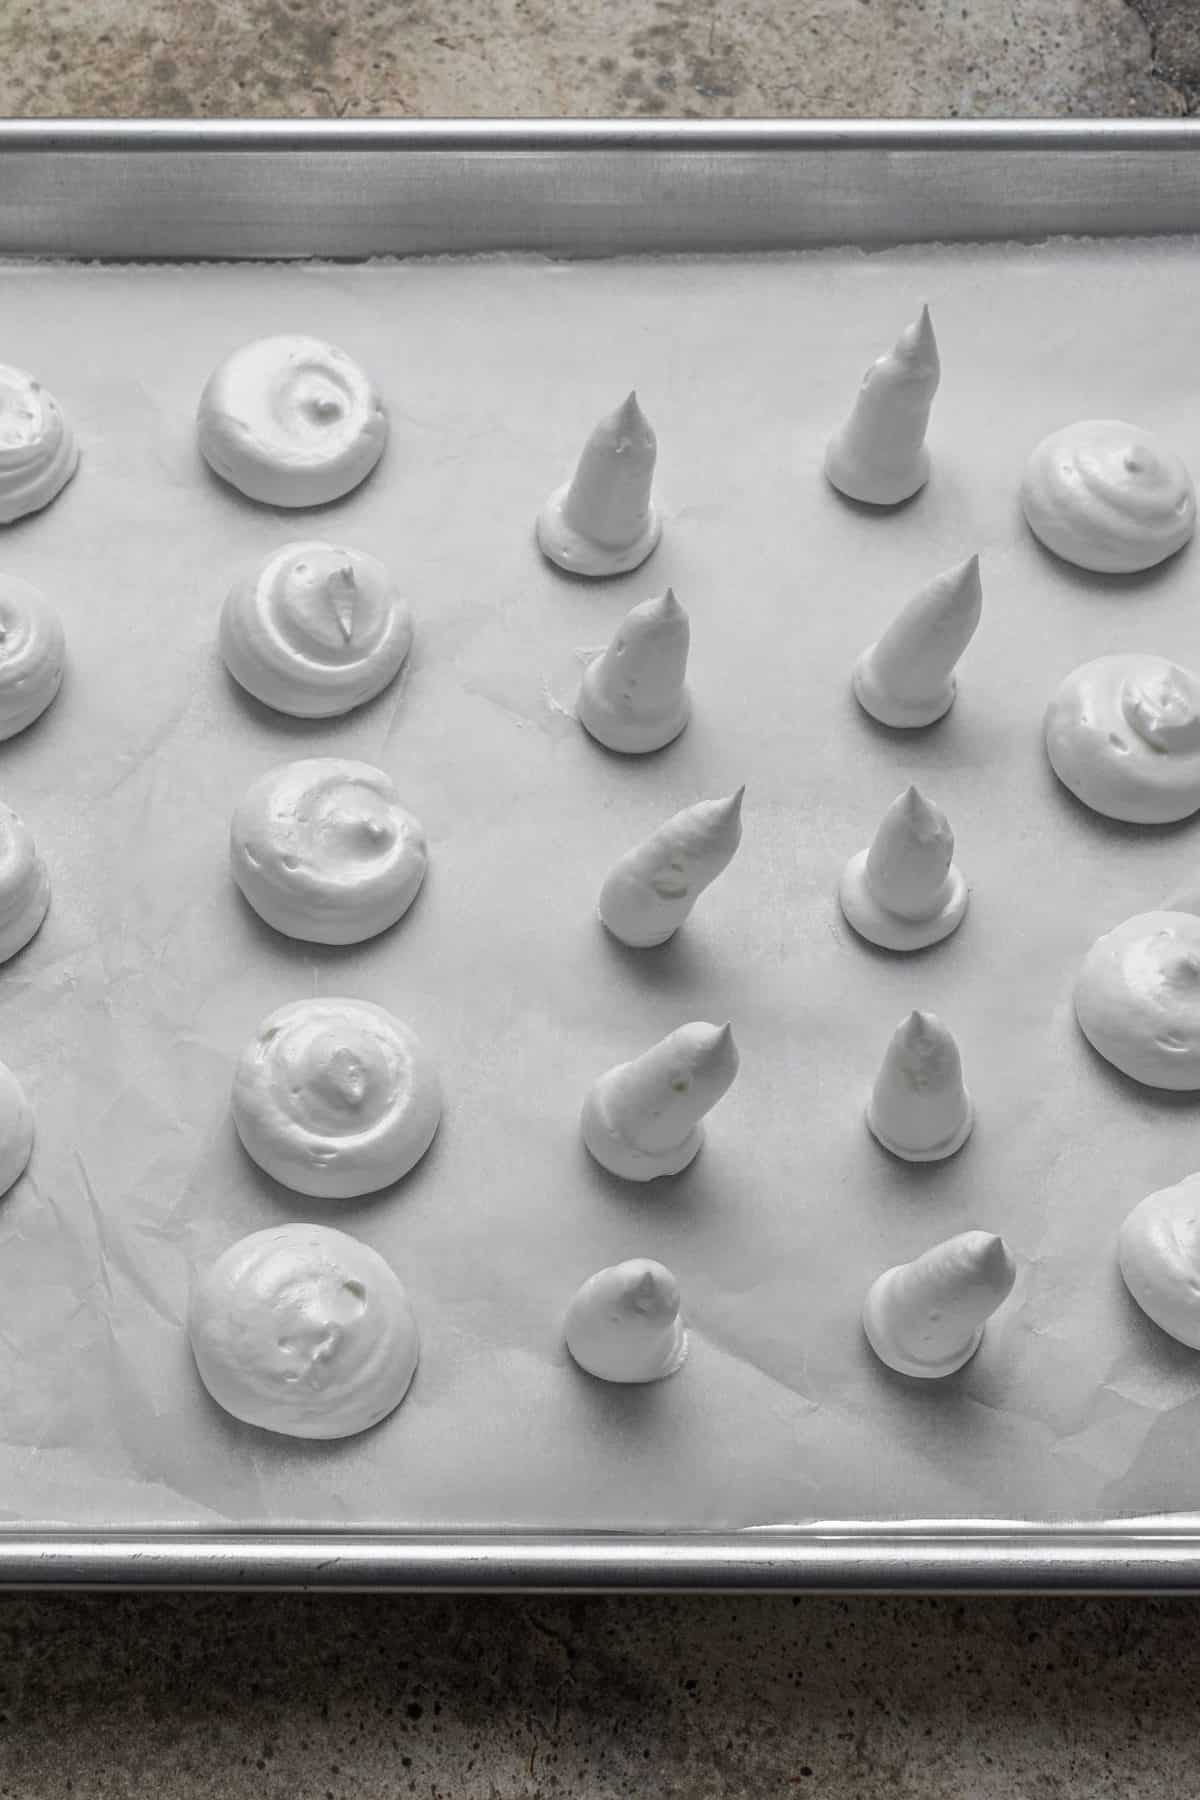 piping the mushroom stems and caps on parchment paper